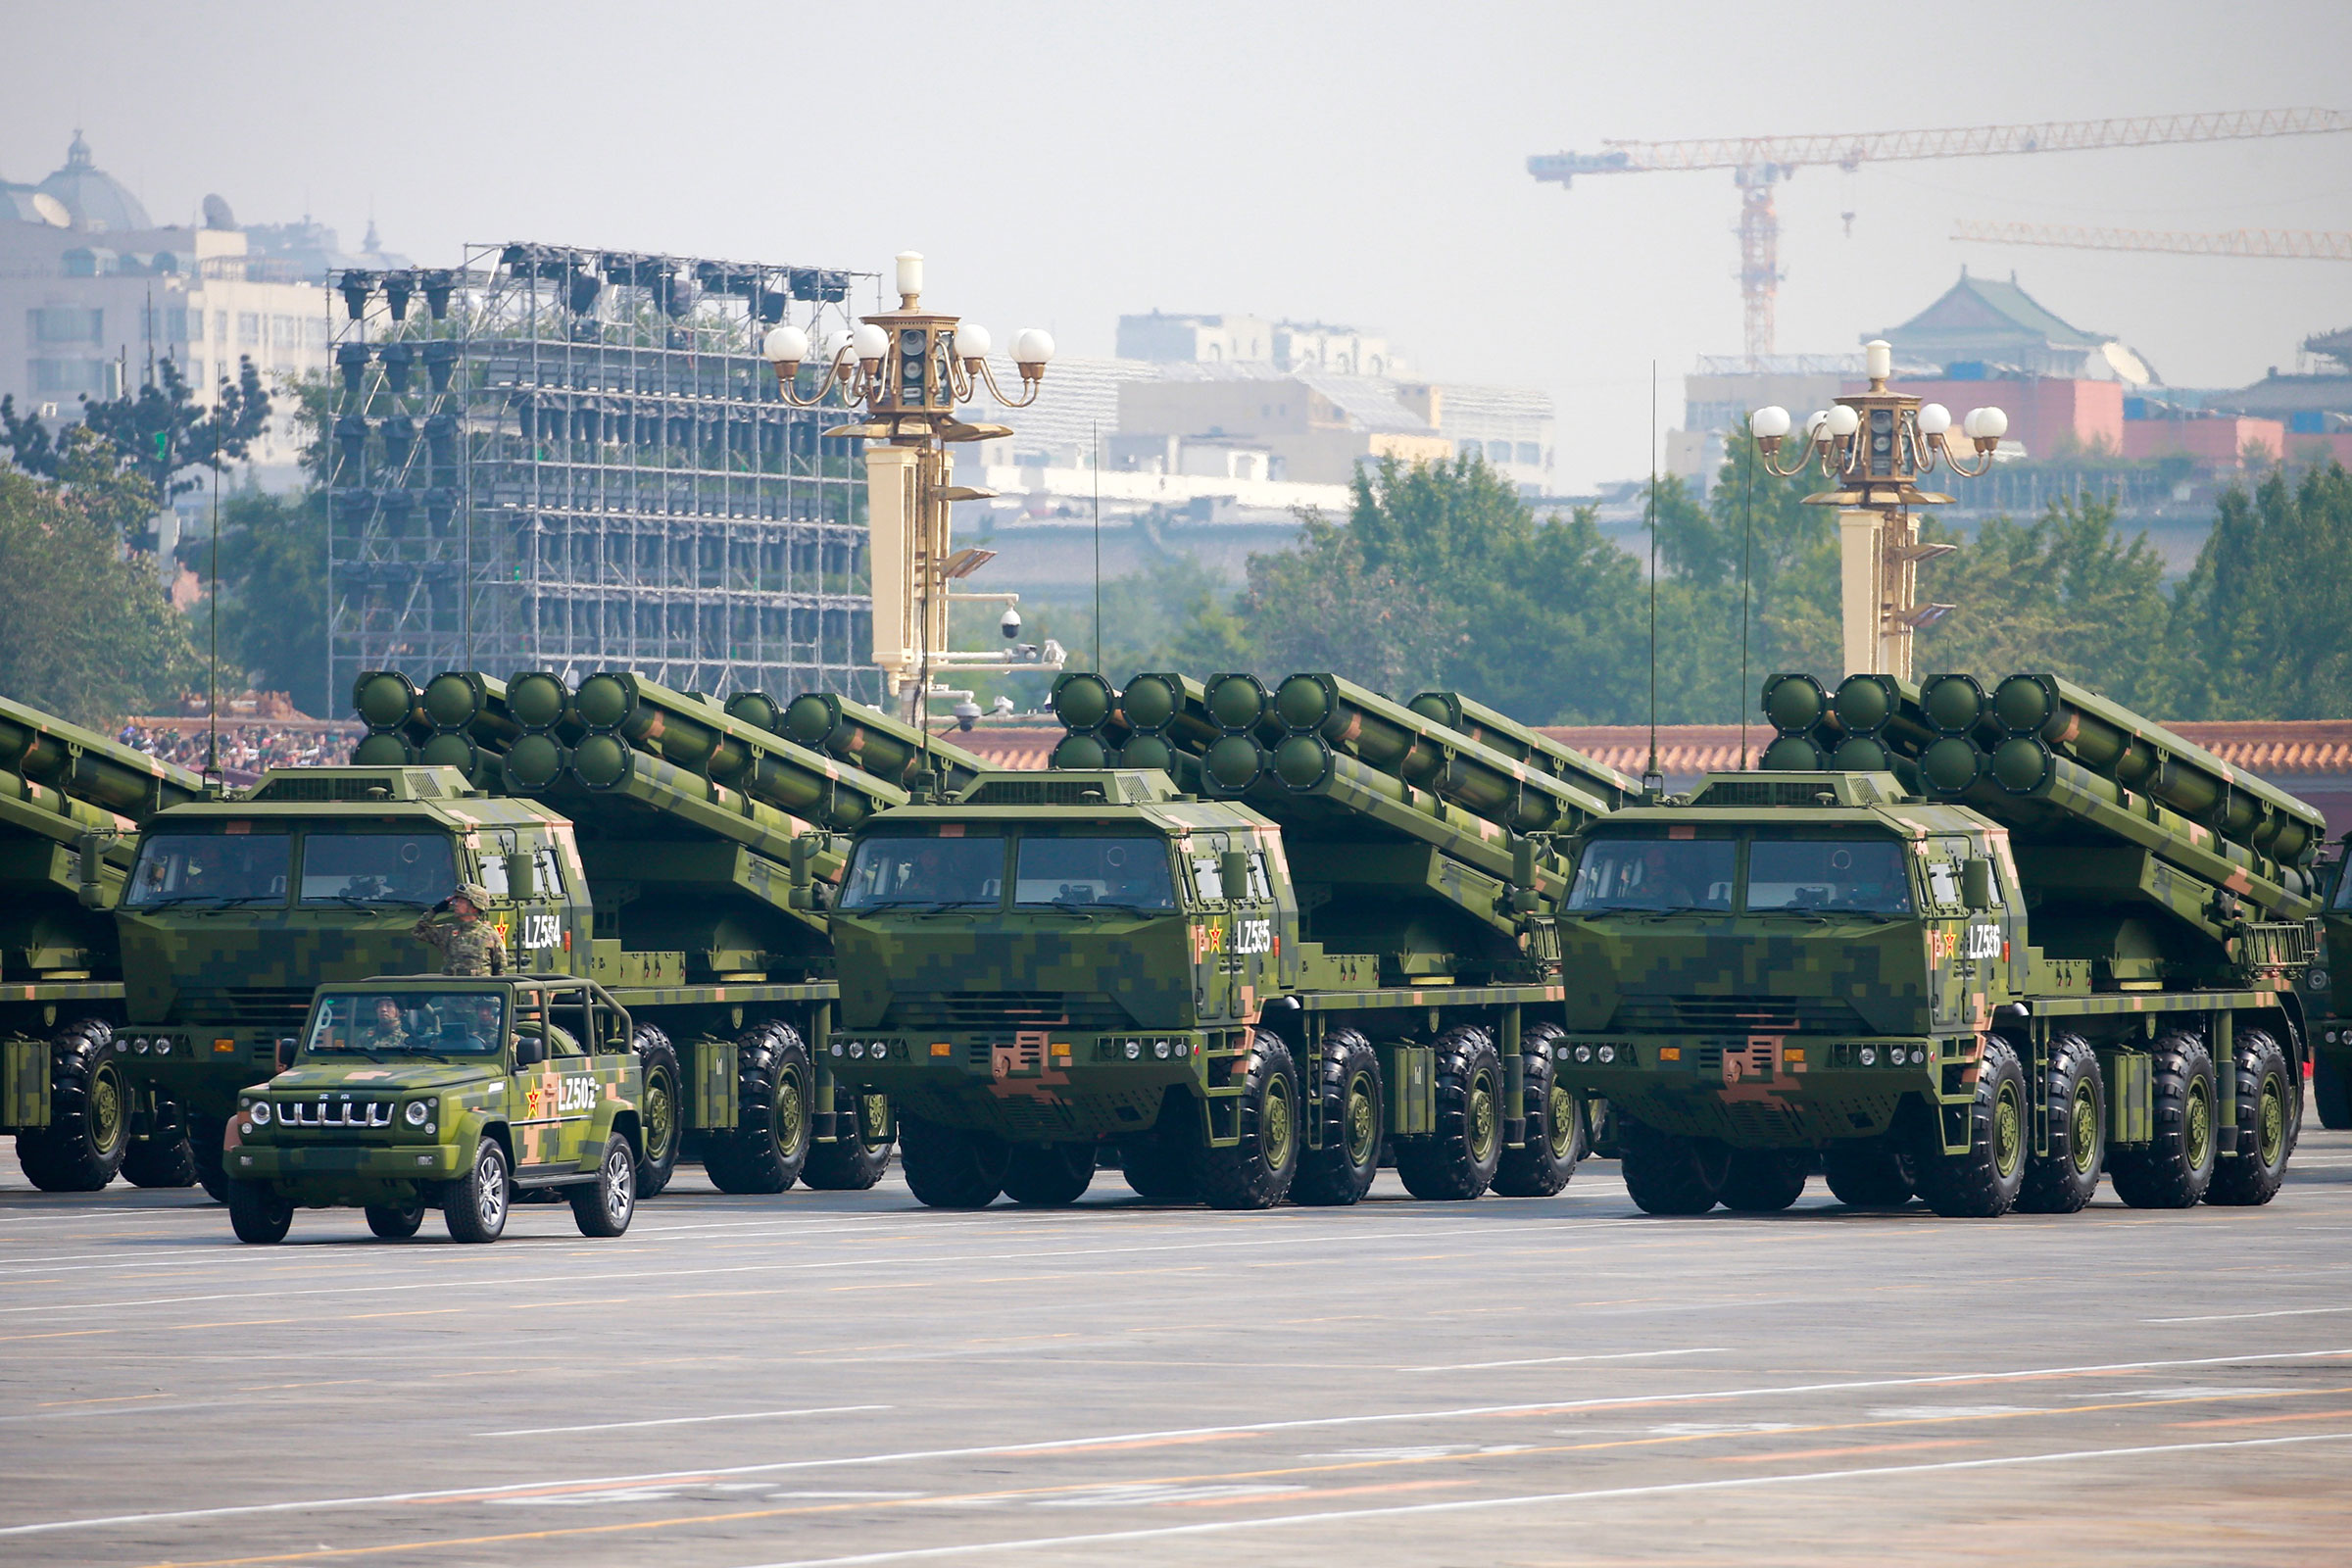 Chinese military missile forces march on the 70th anniversary of the the People's Republic of China founding in Beijing, Oct. 1, 2019. (Shen Shi—Imaginechina/Reuters)